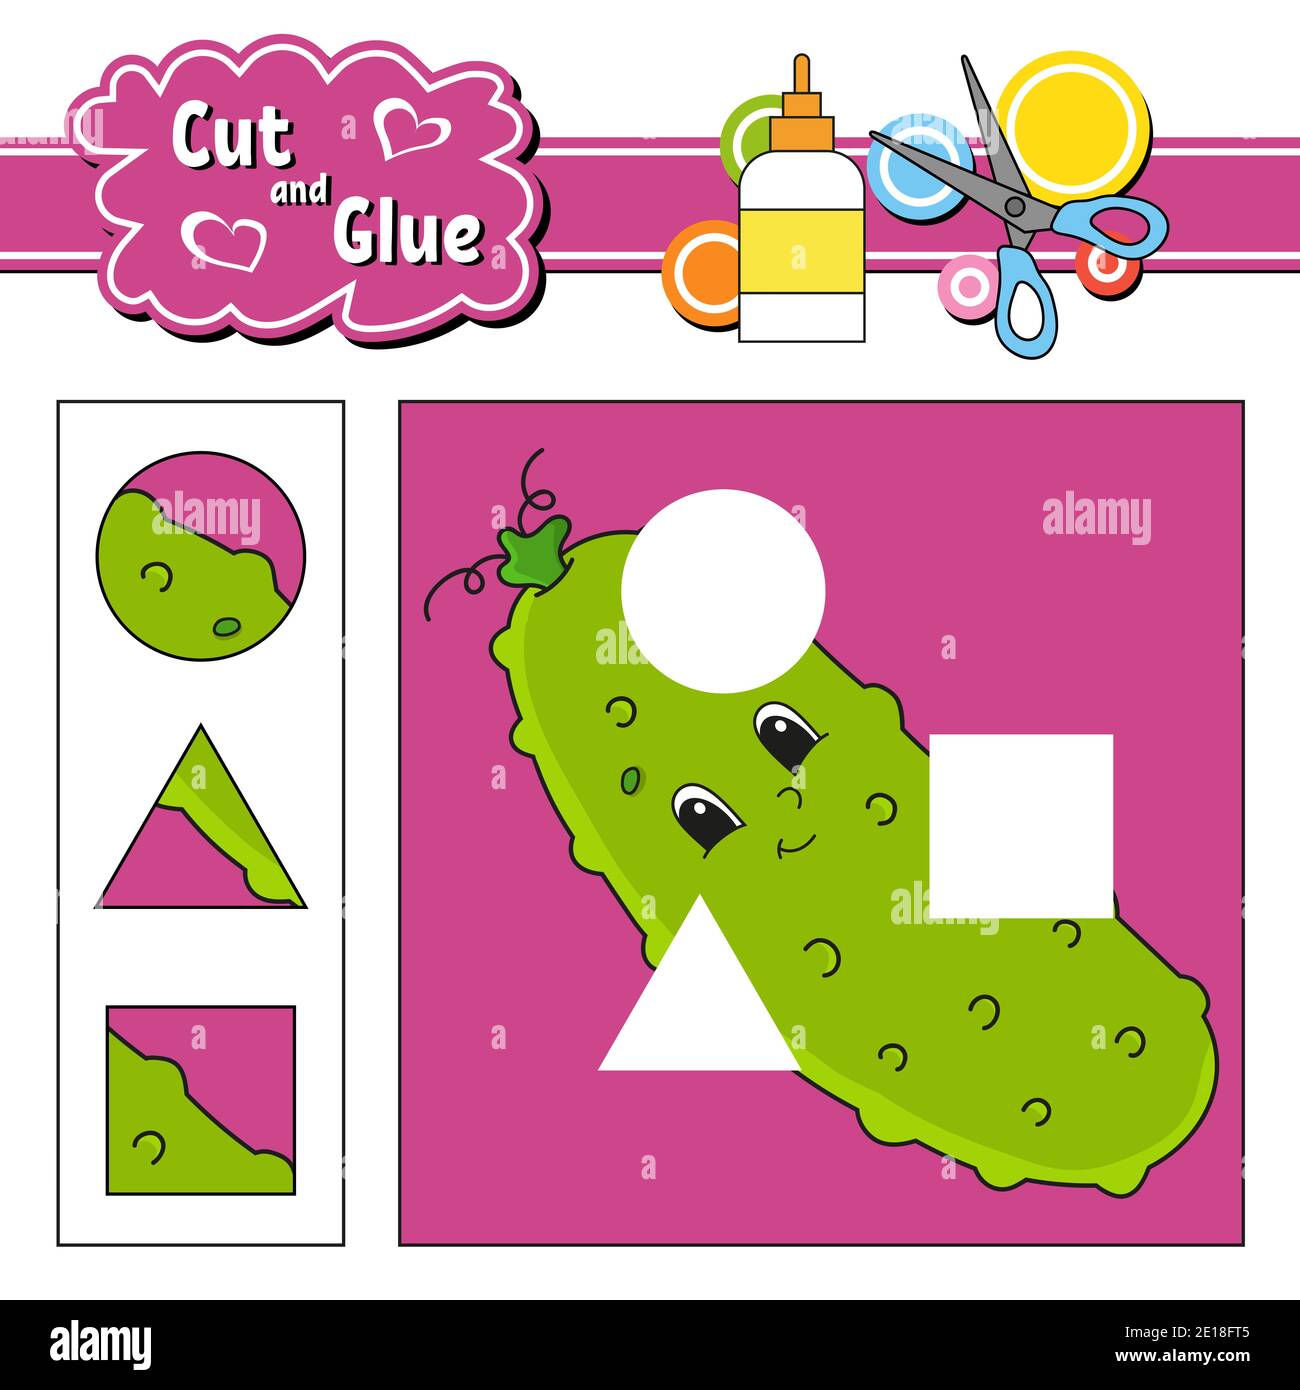 cut-and-glue-game-for-kids-education-developing-worksheet-cartoon-cucumber-character-color